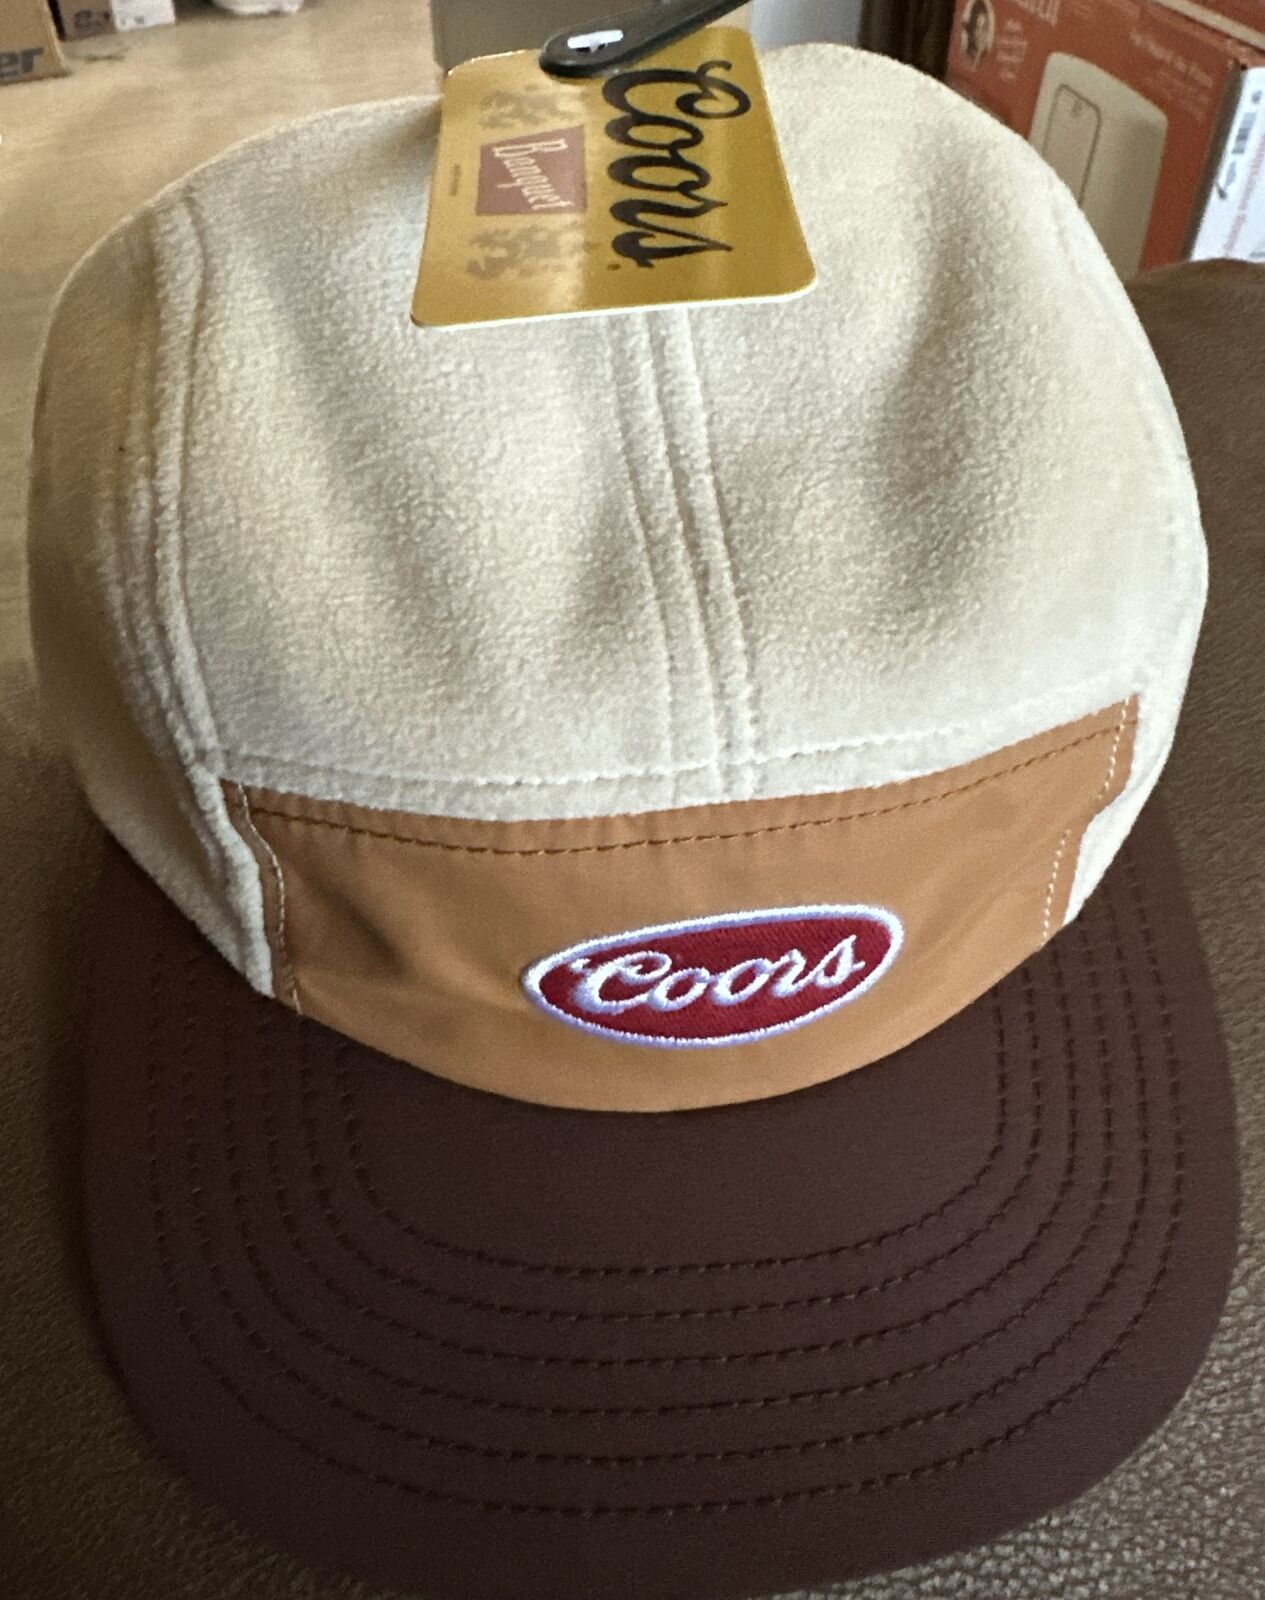 Coors Banquet Vintage Hat Fuzzy Top Brown / Cream Colored